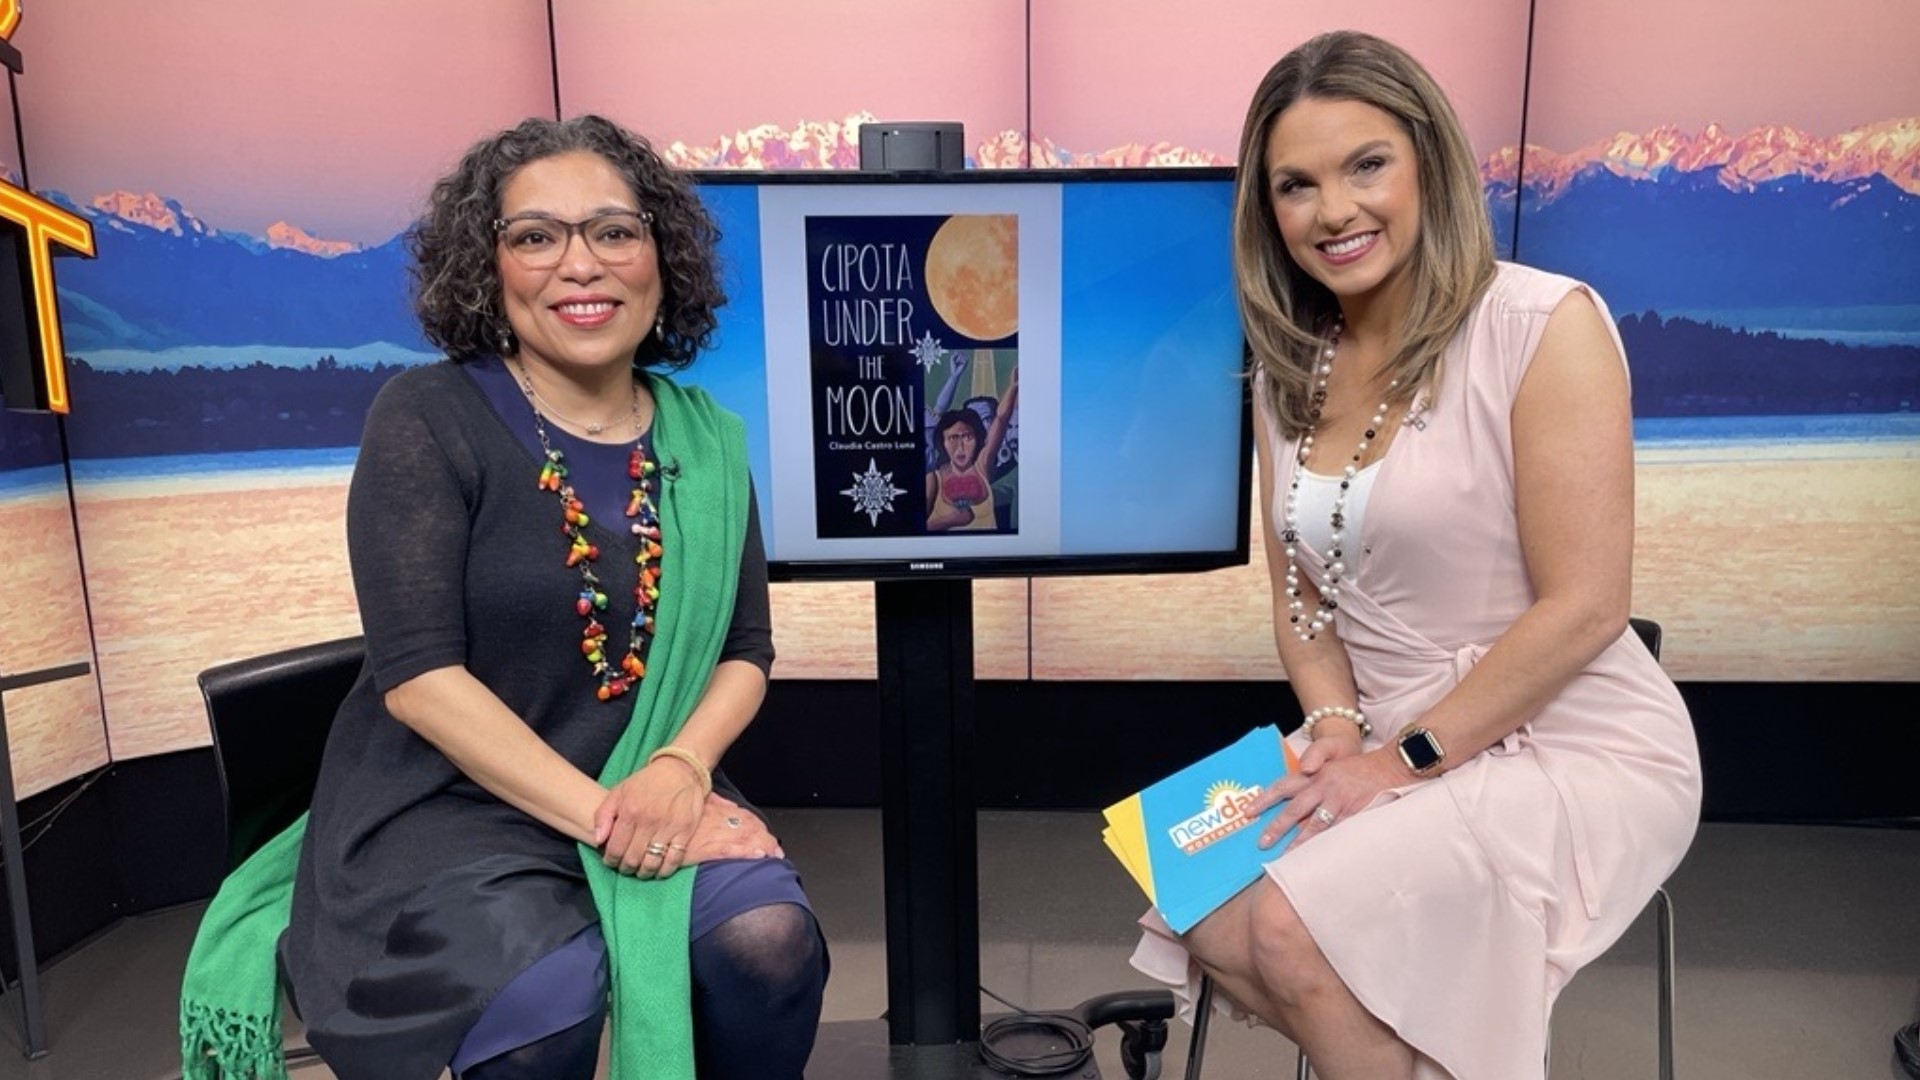 Seattle poet, and former WA State Poet Laureate, Claudia Castro Luna shares her new book "Cipota Under the Moon." #newdaynw